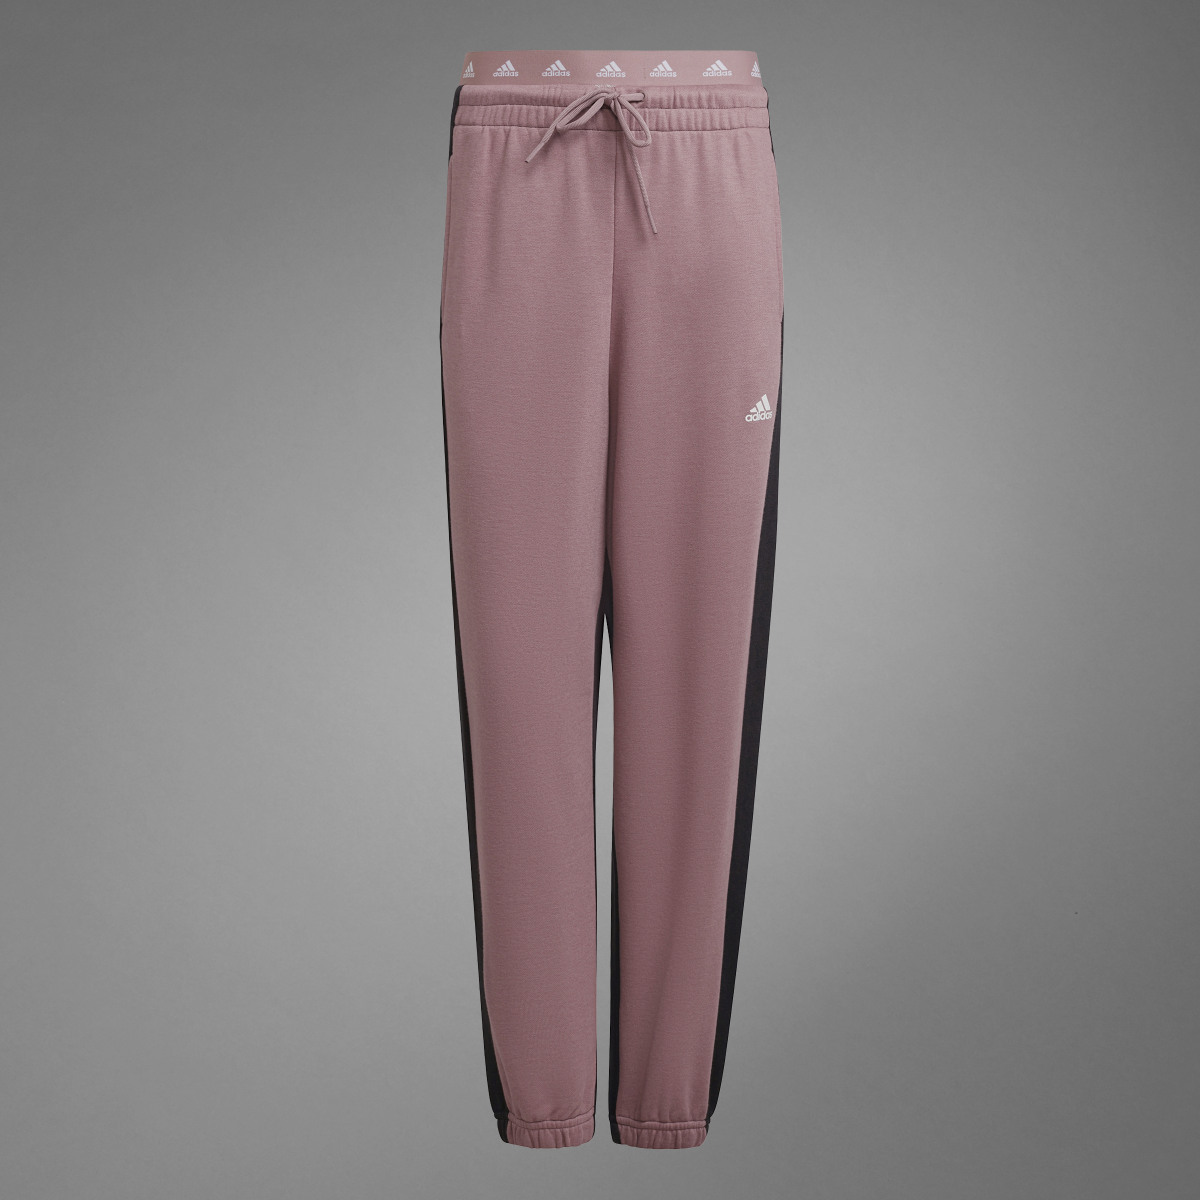 Adidas Hyperglam French Terry Pants. 10